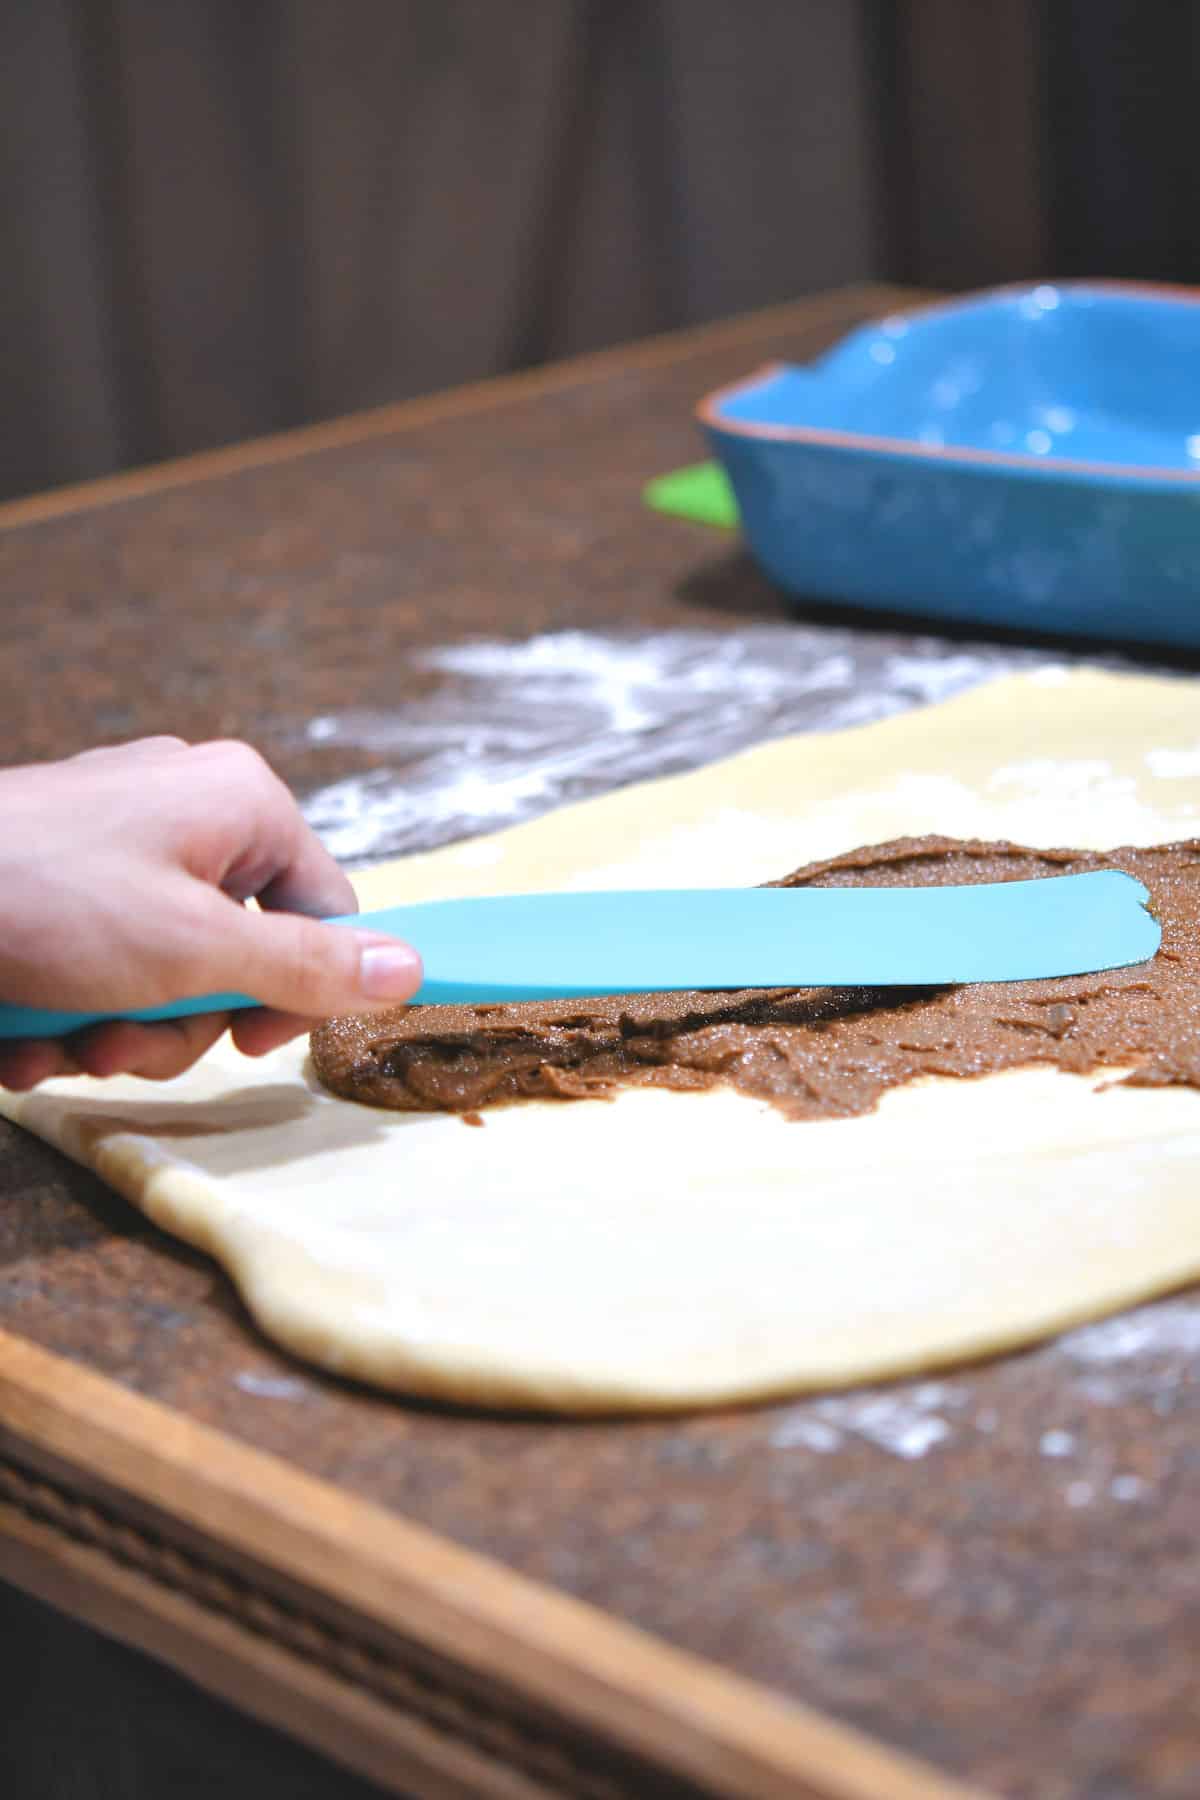 using a spurtle to spread cinnamon mixture on rolled out dough